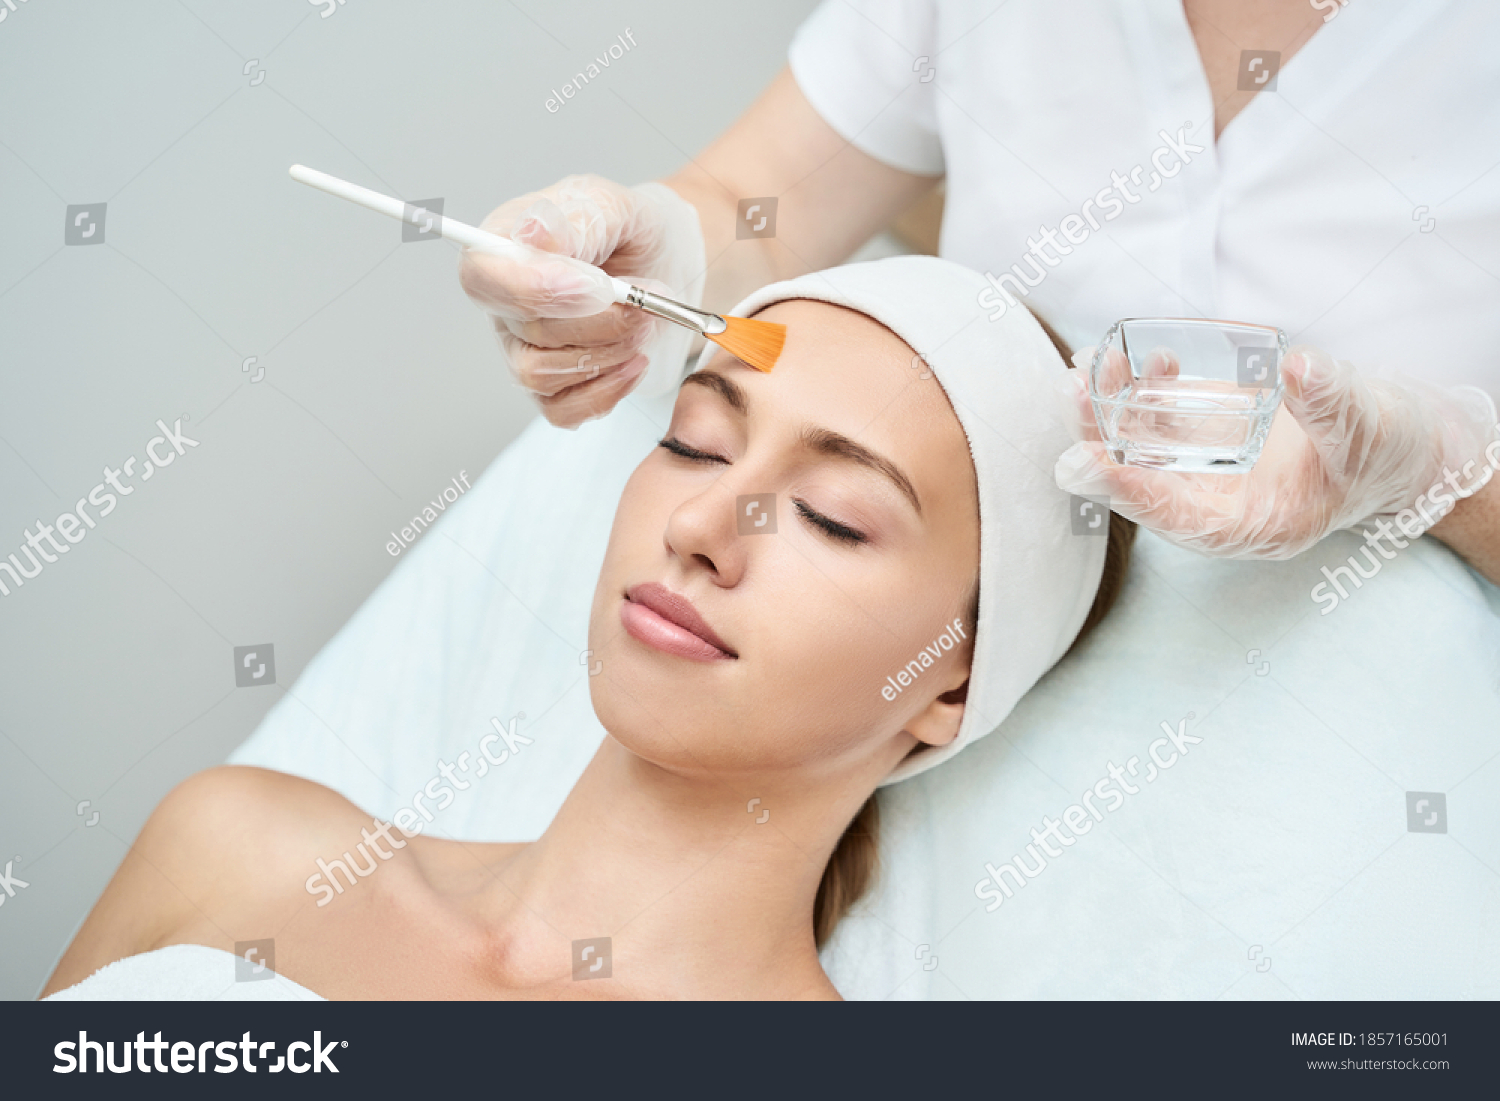 Cosmetology beauty procedure. Young woman skin care. Beautiful female person. Rejuvenation treatment. Facial chemical peel therapy. Clinical healthcare. Doctor hand. Dermatology cleanser. #1857165001